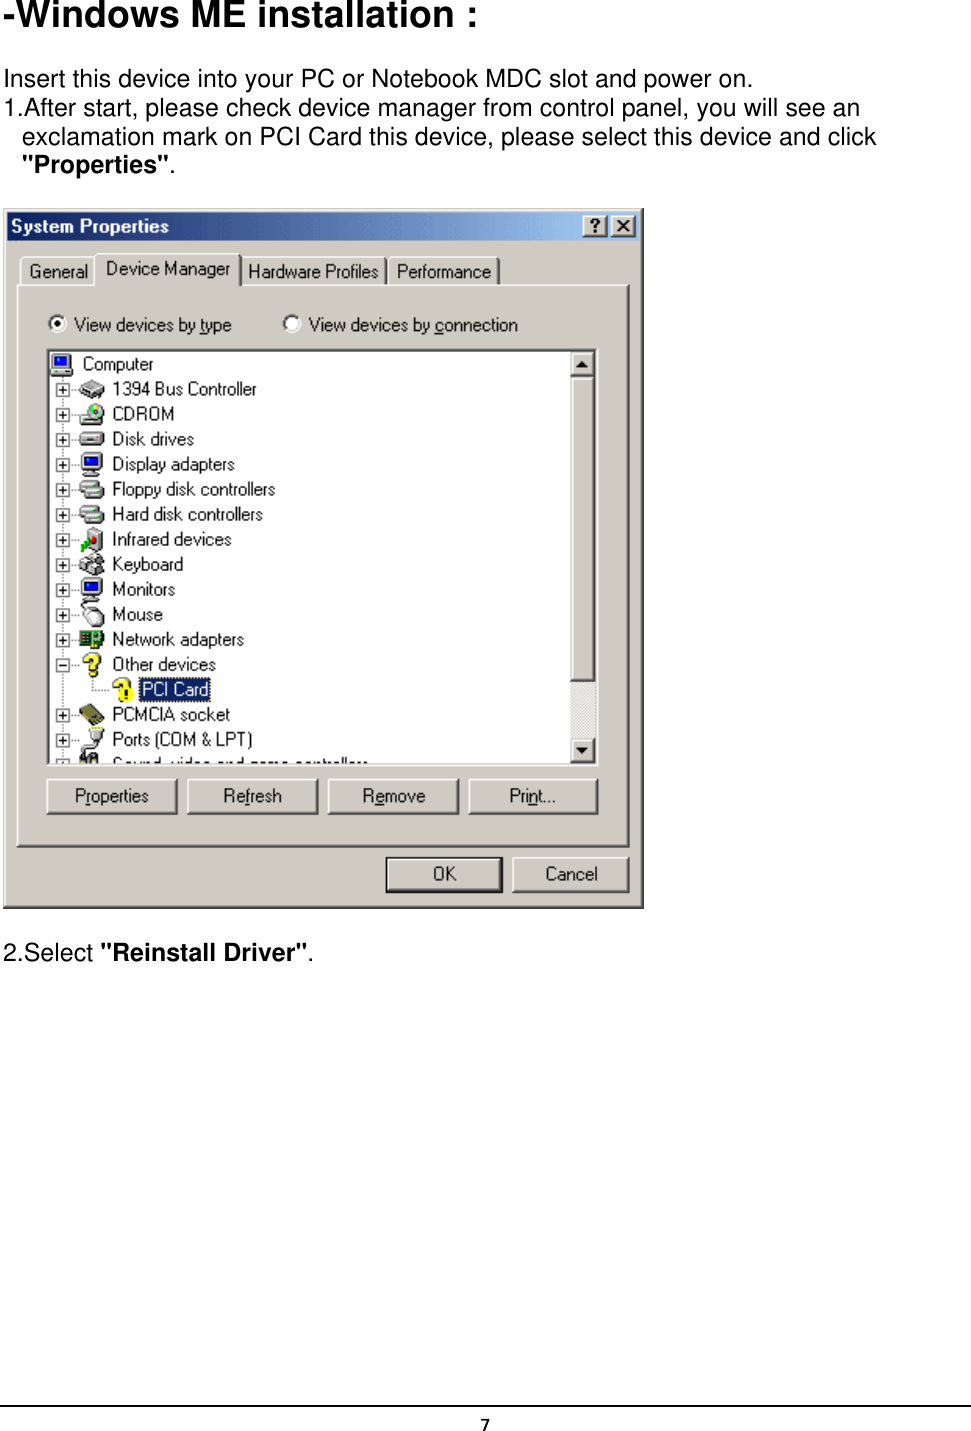   7-Windows ME installation : Insert this device into your PC or Notebook MDC slot and power on. 1.After start, please check device manager from control panel, you will see an exclamation mark on PCI Card this device, please select this device and click &quot;Properties&quot;.  2.Select &quot;Reinstall Driver&quot;. 